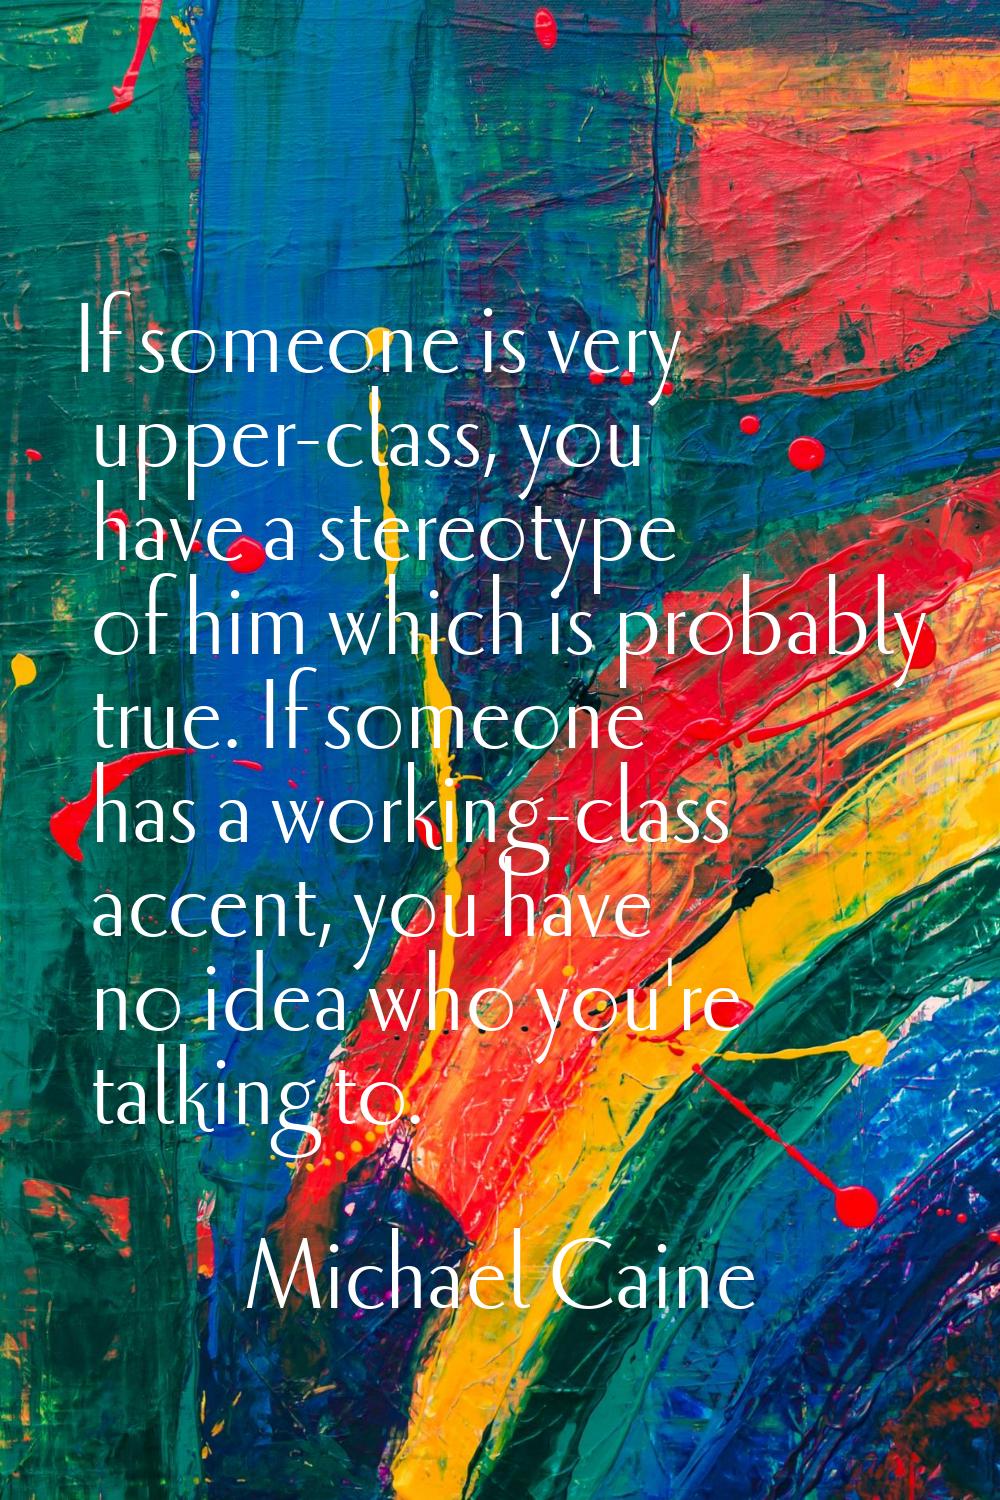 If someone is very upper-class, you have a stereotype of him which is probably true. If someone has